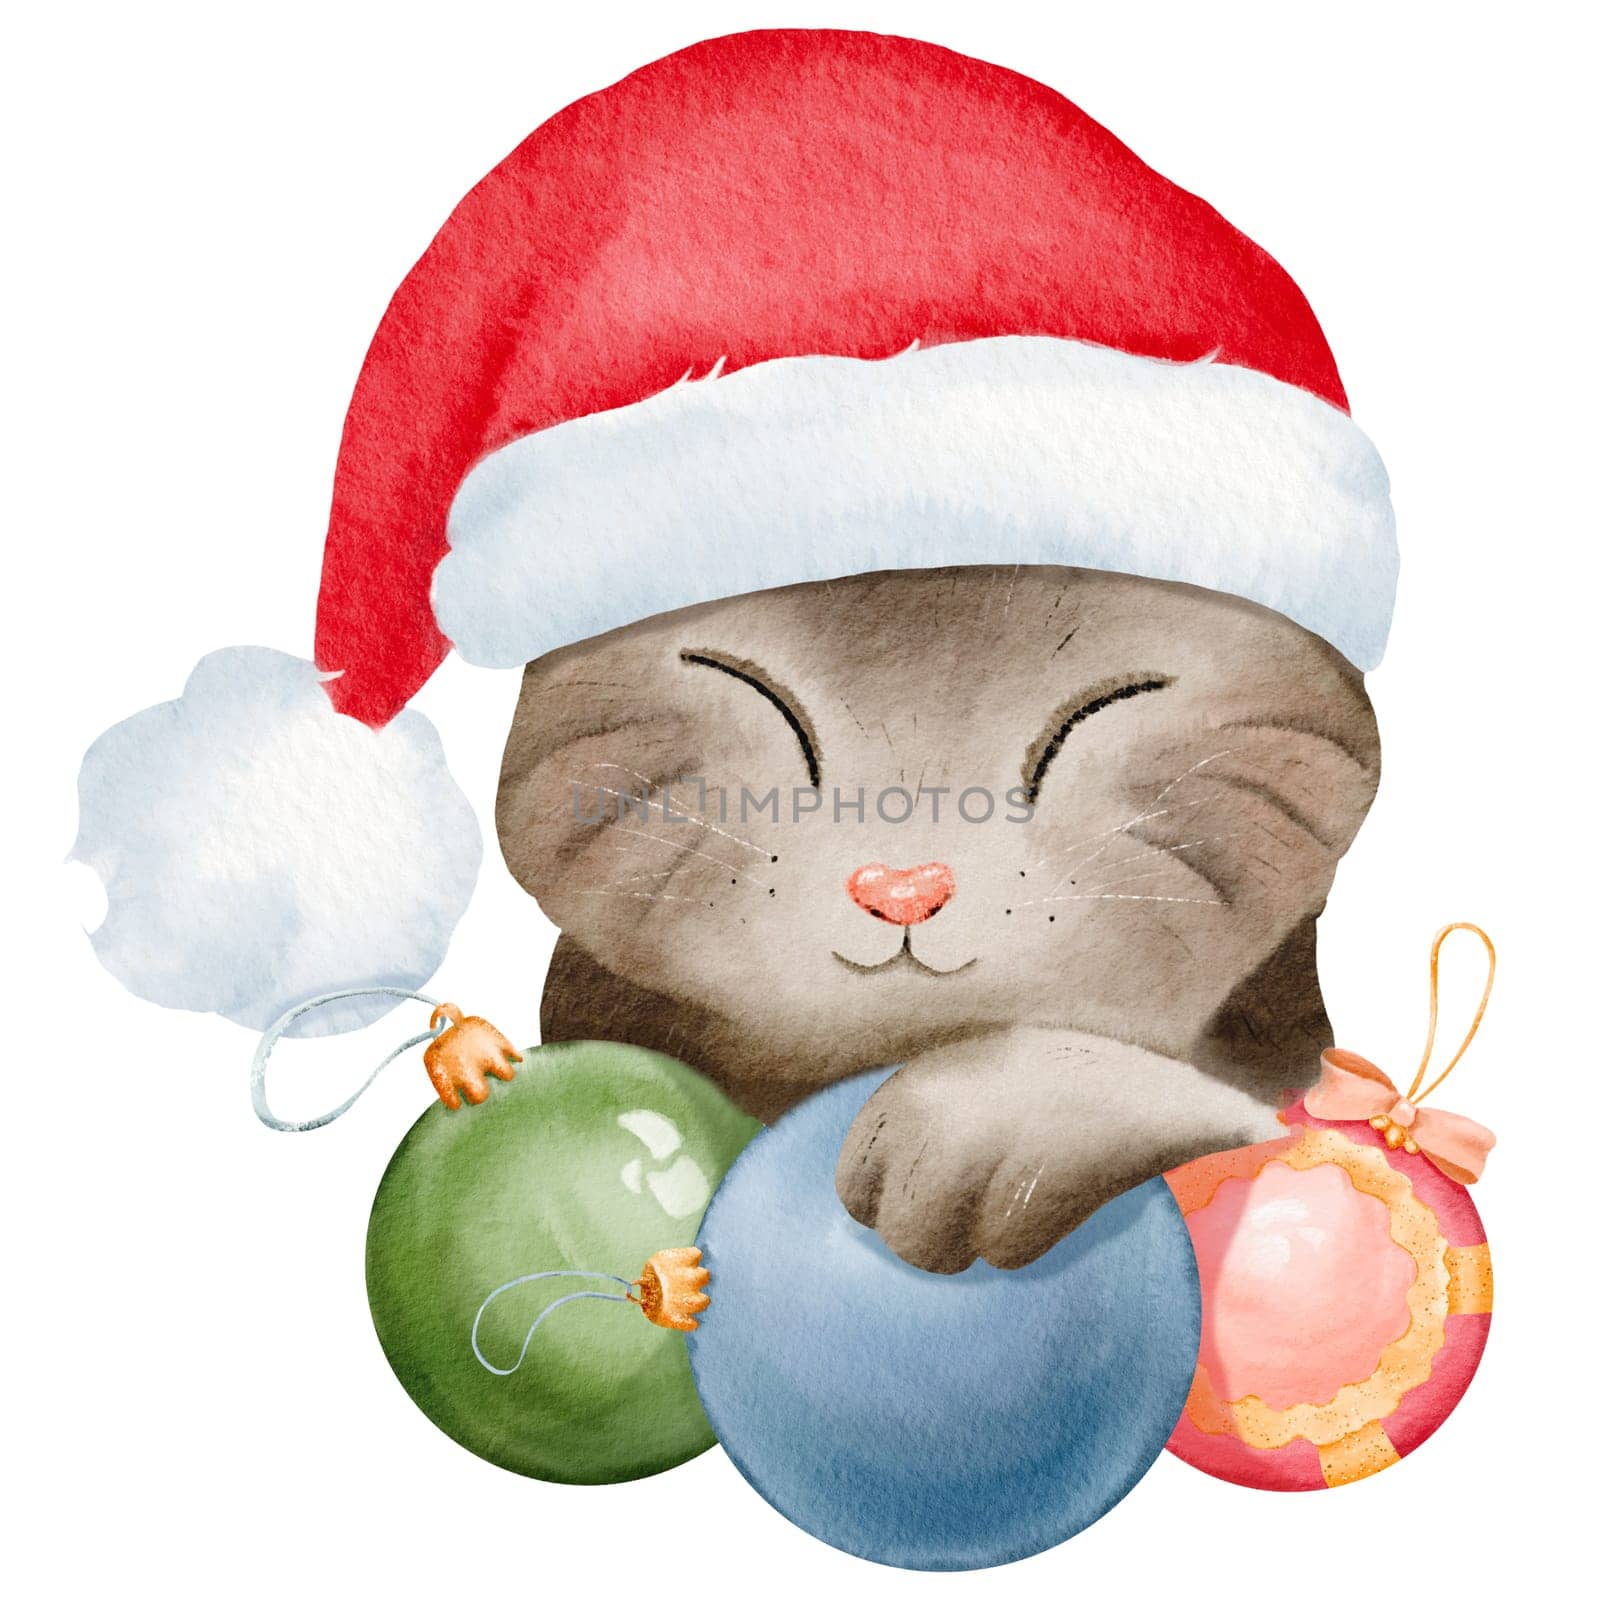 Cozy striped kitten in a Santa hat peacefully sleeps on Christmas ornaments. Cartoon cat portrait evokes a festive atmosphere. Perfect for cards, invites, posters, stickers. Watercolor illustration.